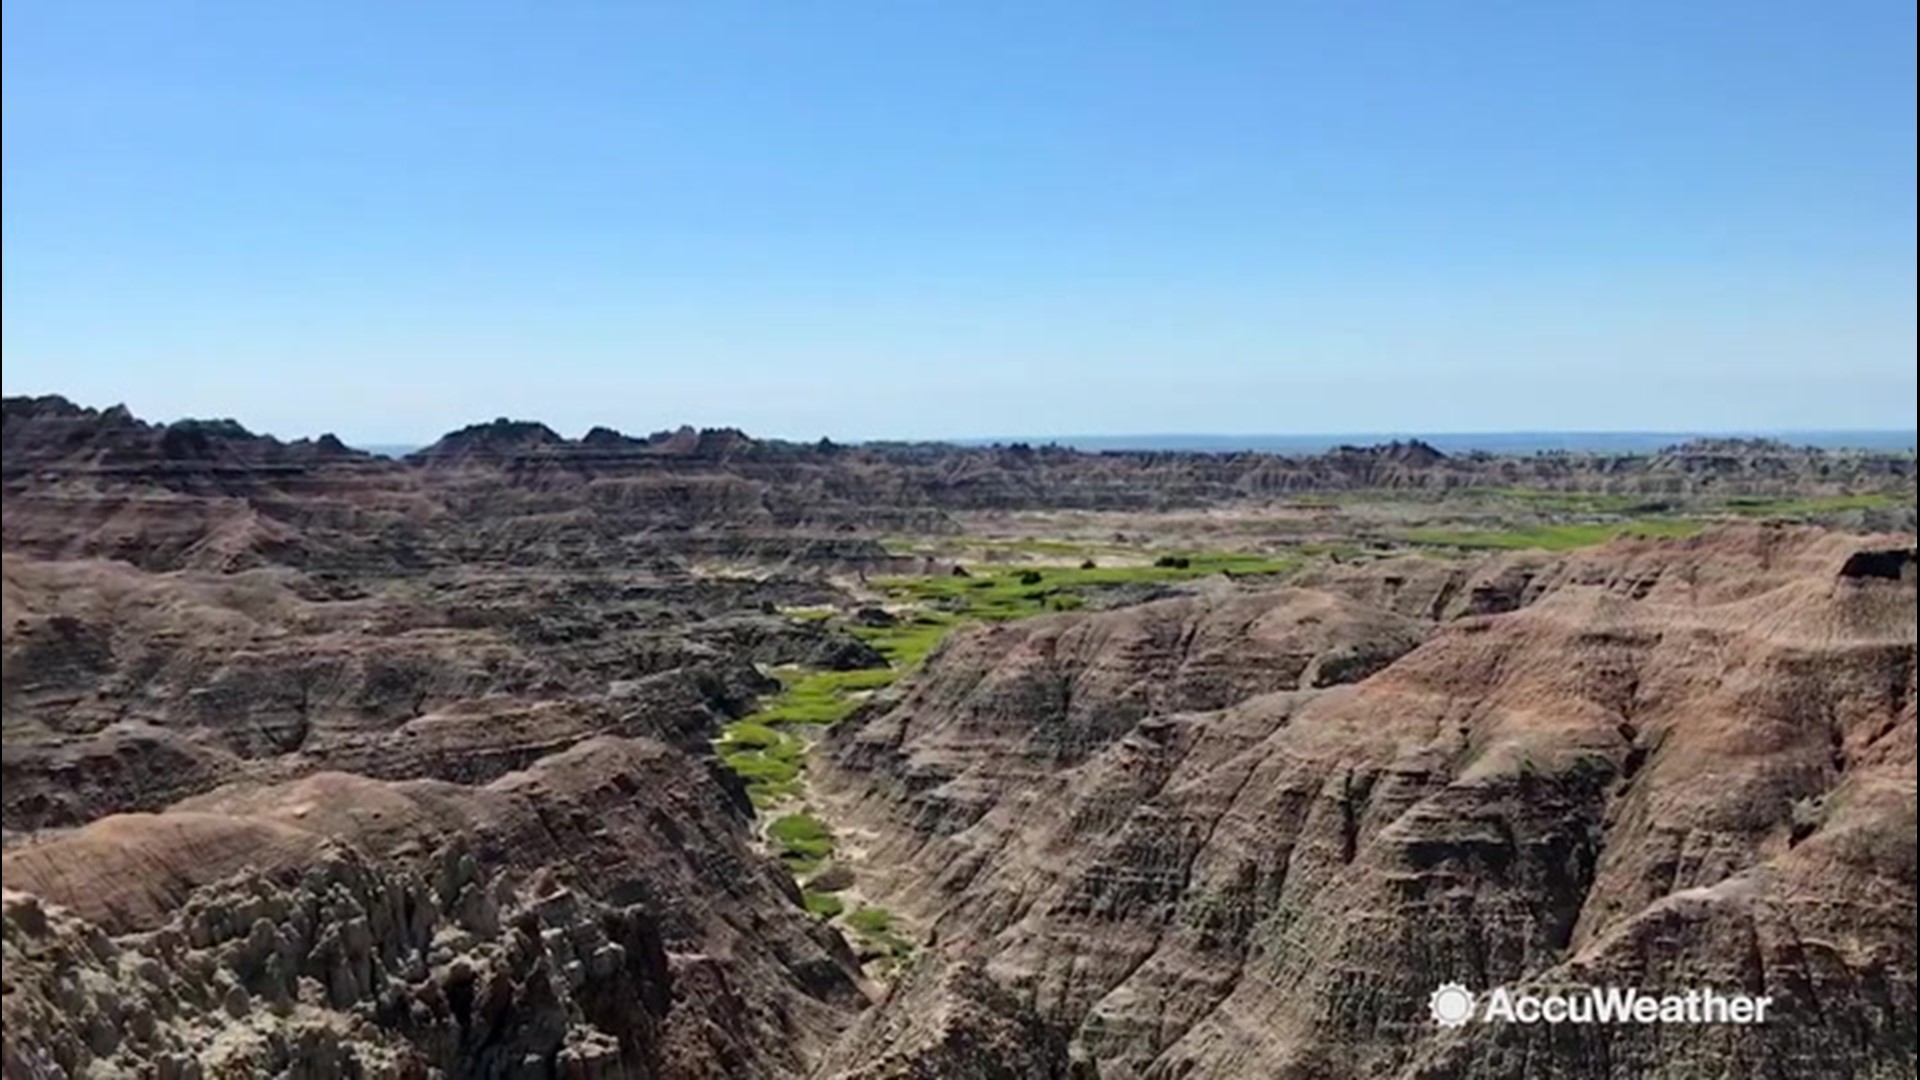 AccuWeather's #GreatAmericanRoadTrip continues on July 18 with Lincoln Riddle stopping at another national park, this time the stunning Badlands National Park in South Dakota. Join us on this beautiful day as Lincoln explores the scenery.